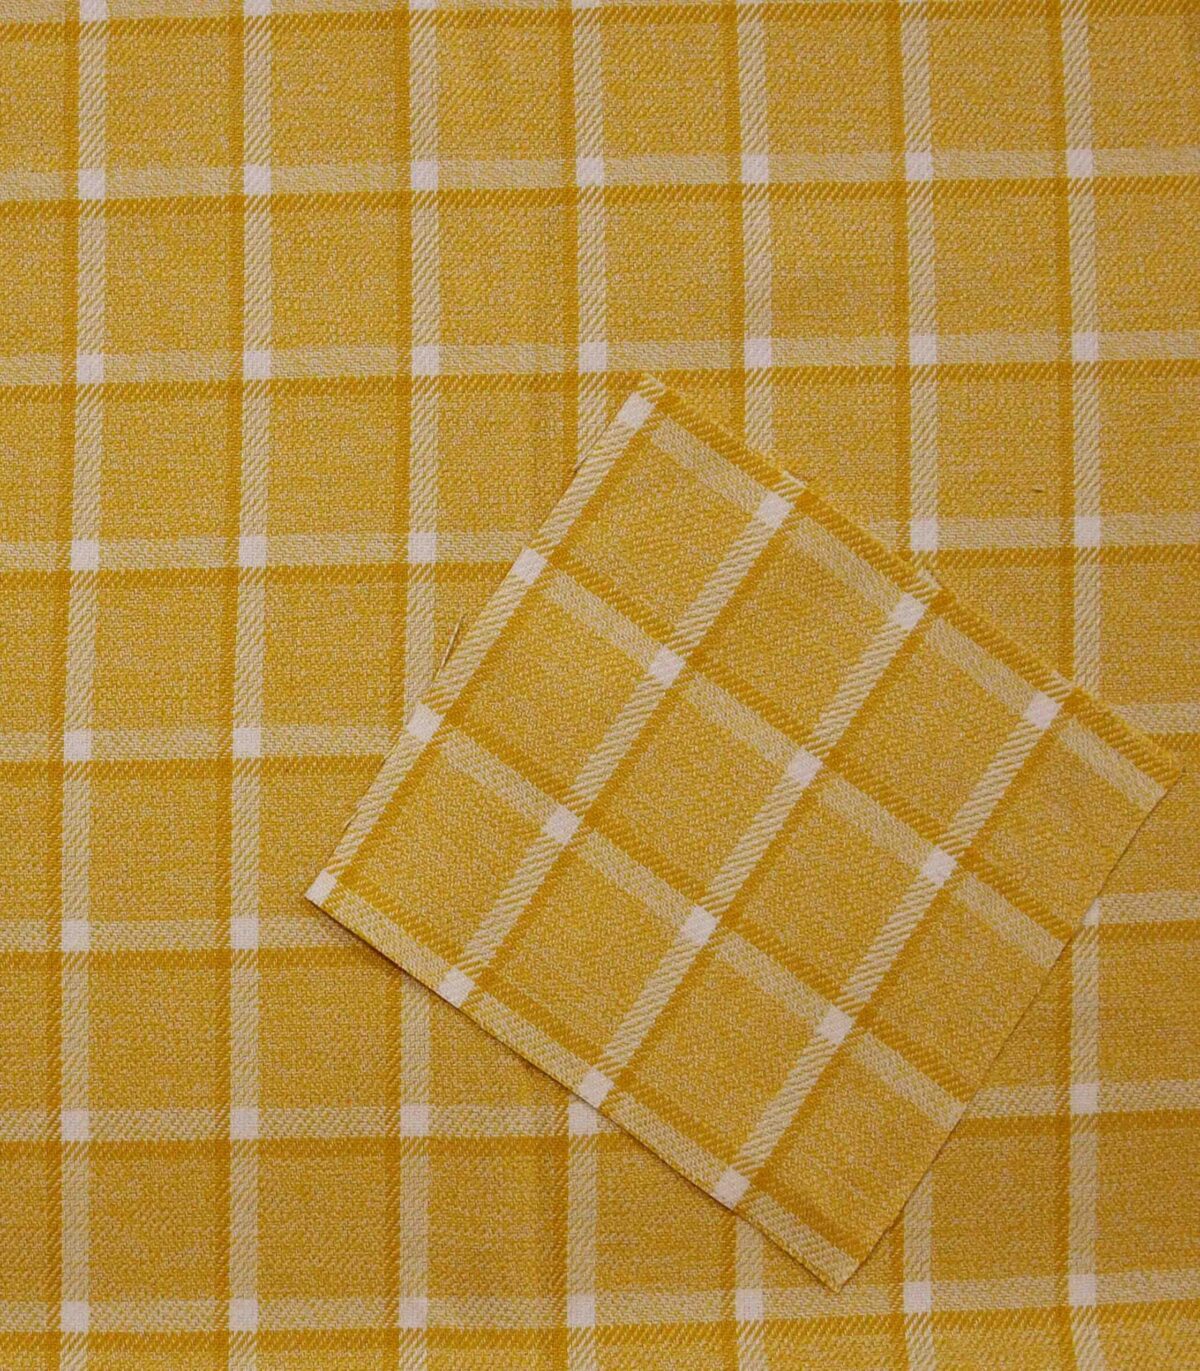 Cotton Twill Yellow Checked Woven Fabric